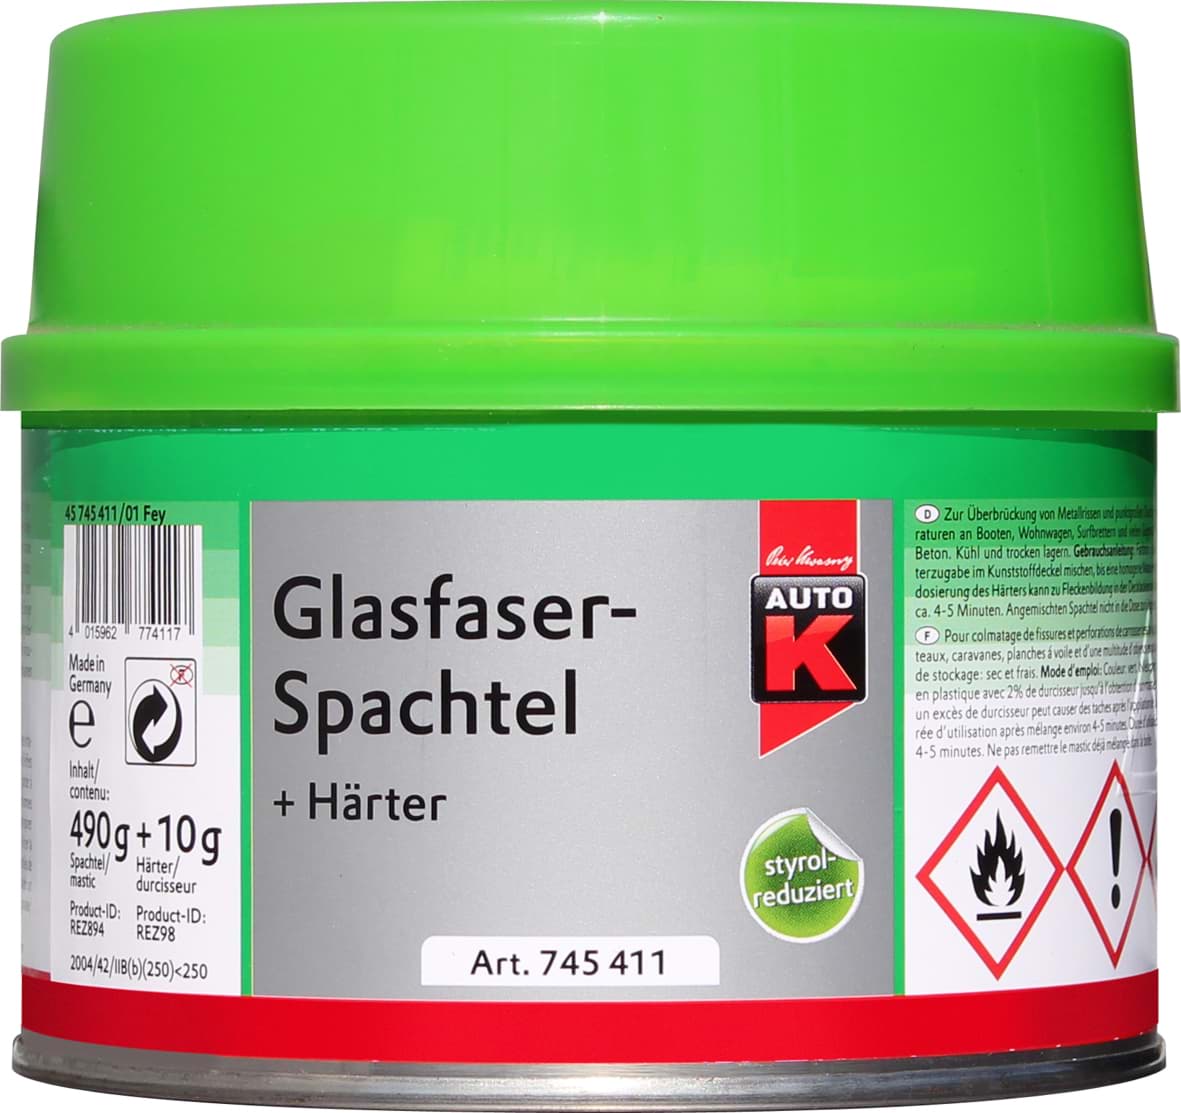 Picture of AutoK Glasfaserspachtel 500g 745411